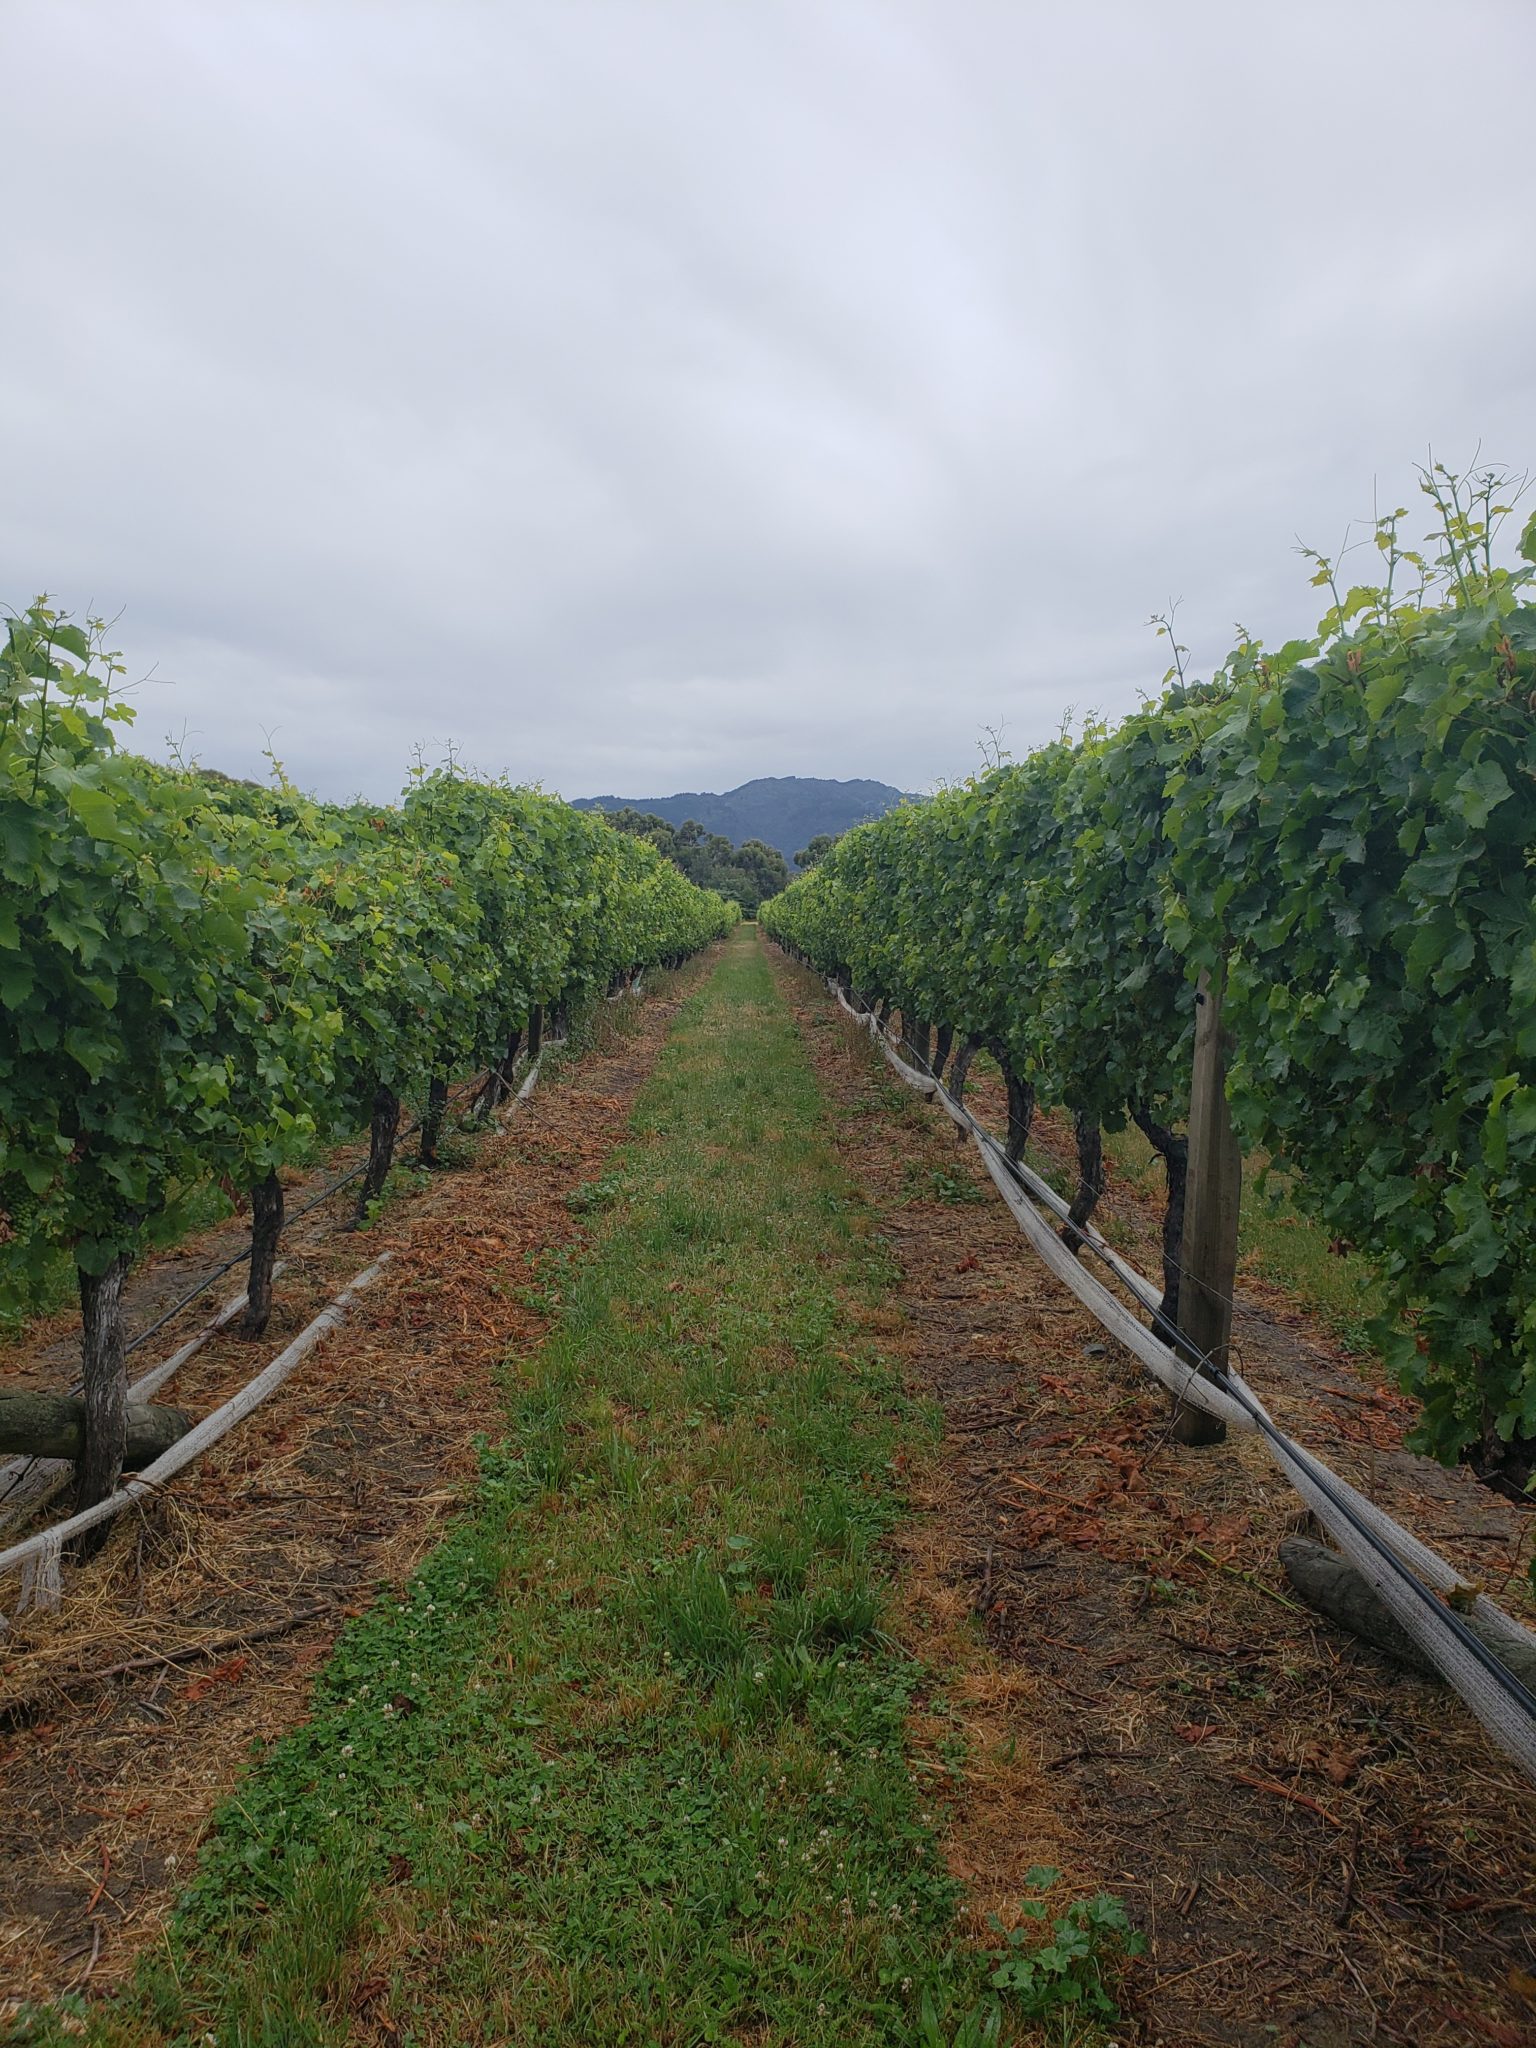 a rows of vines in a vineyard